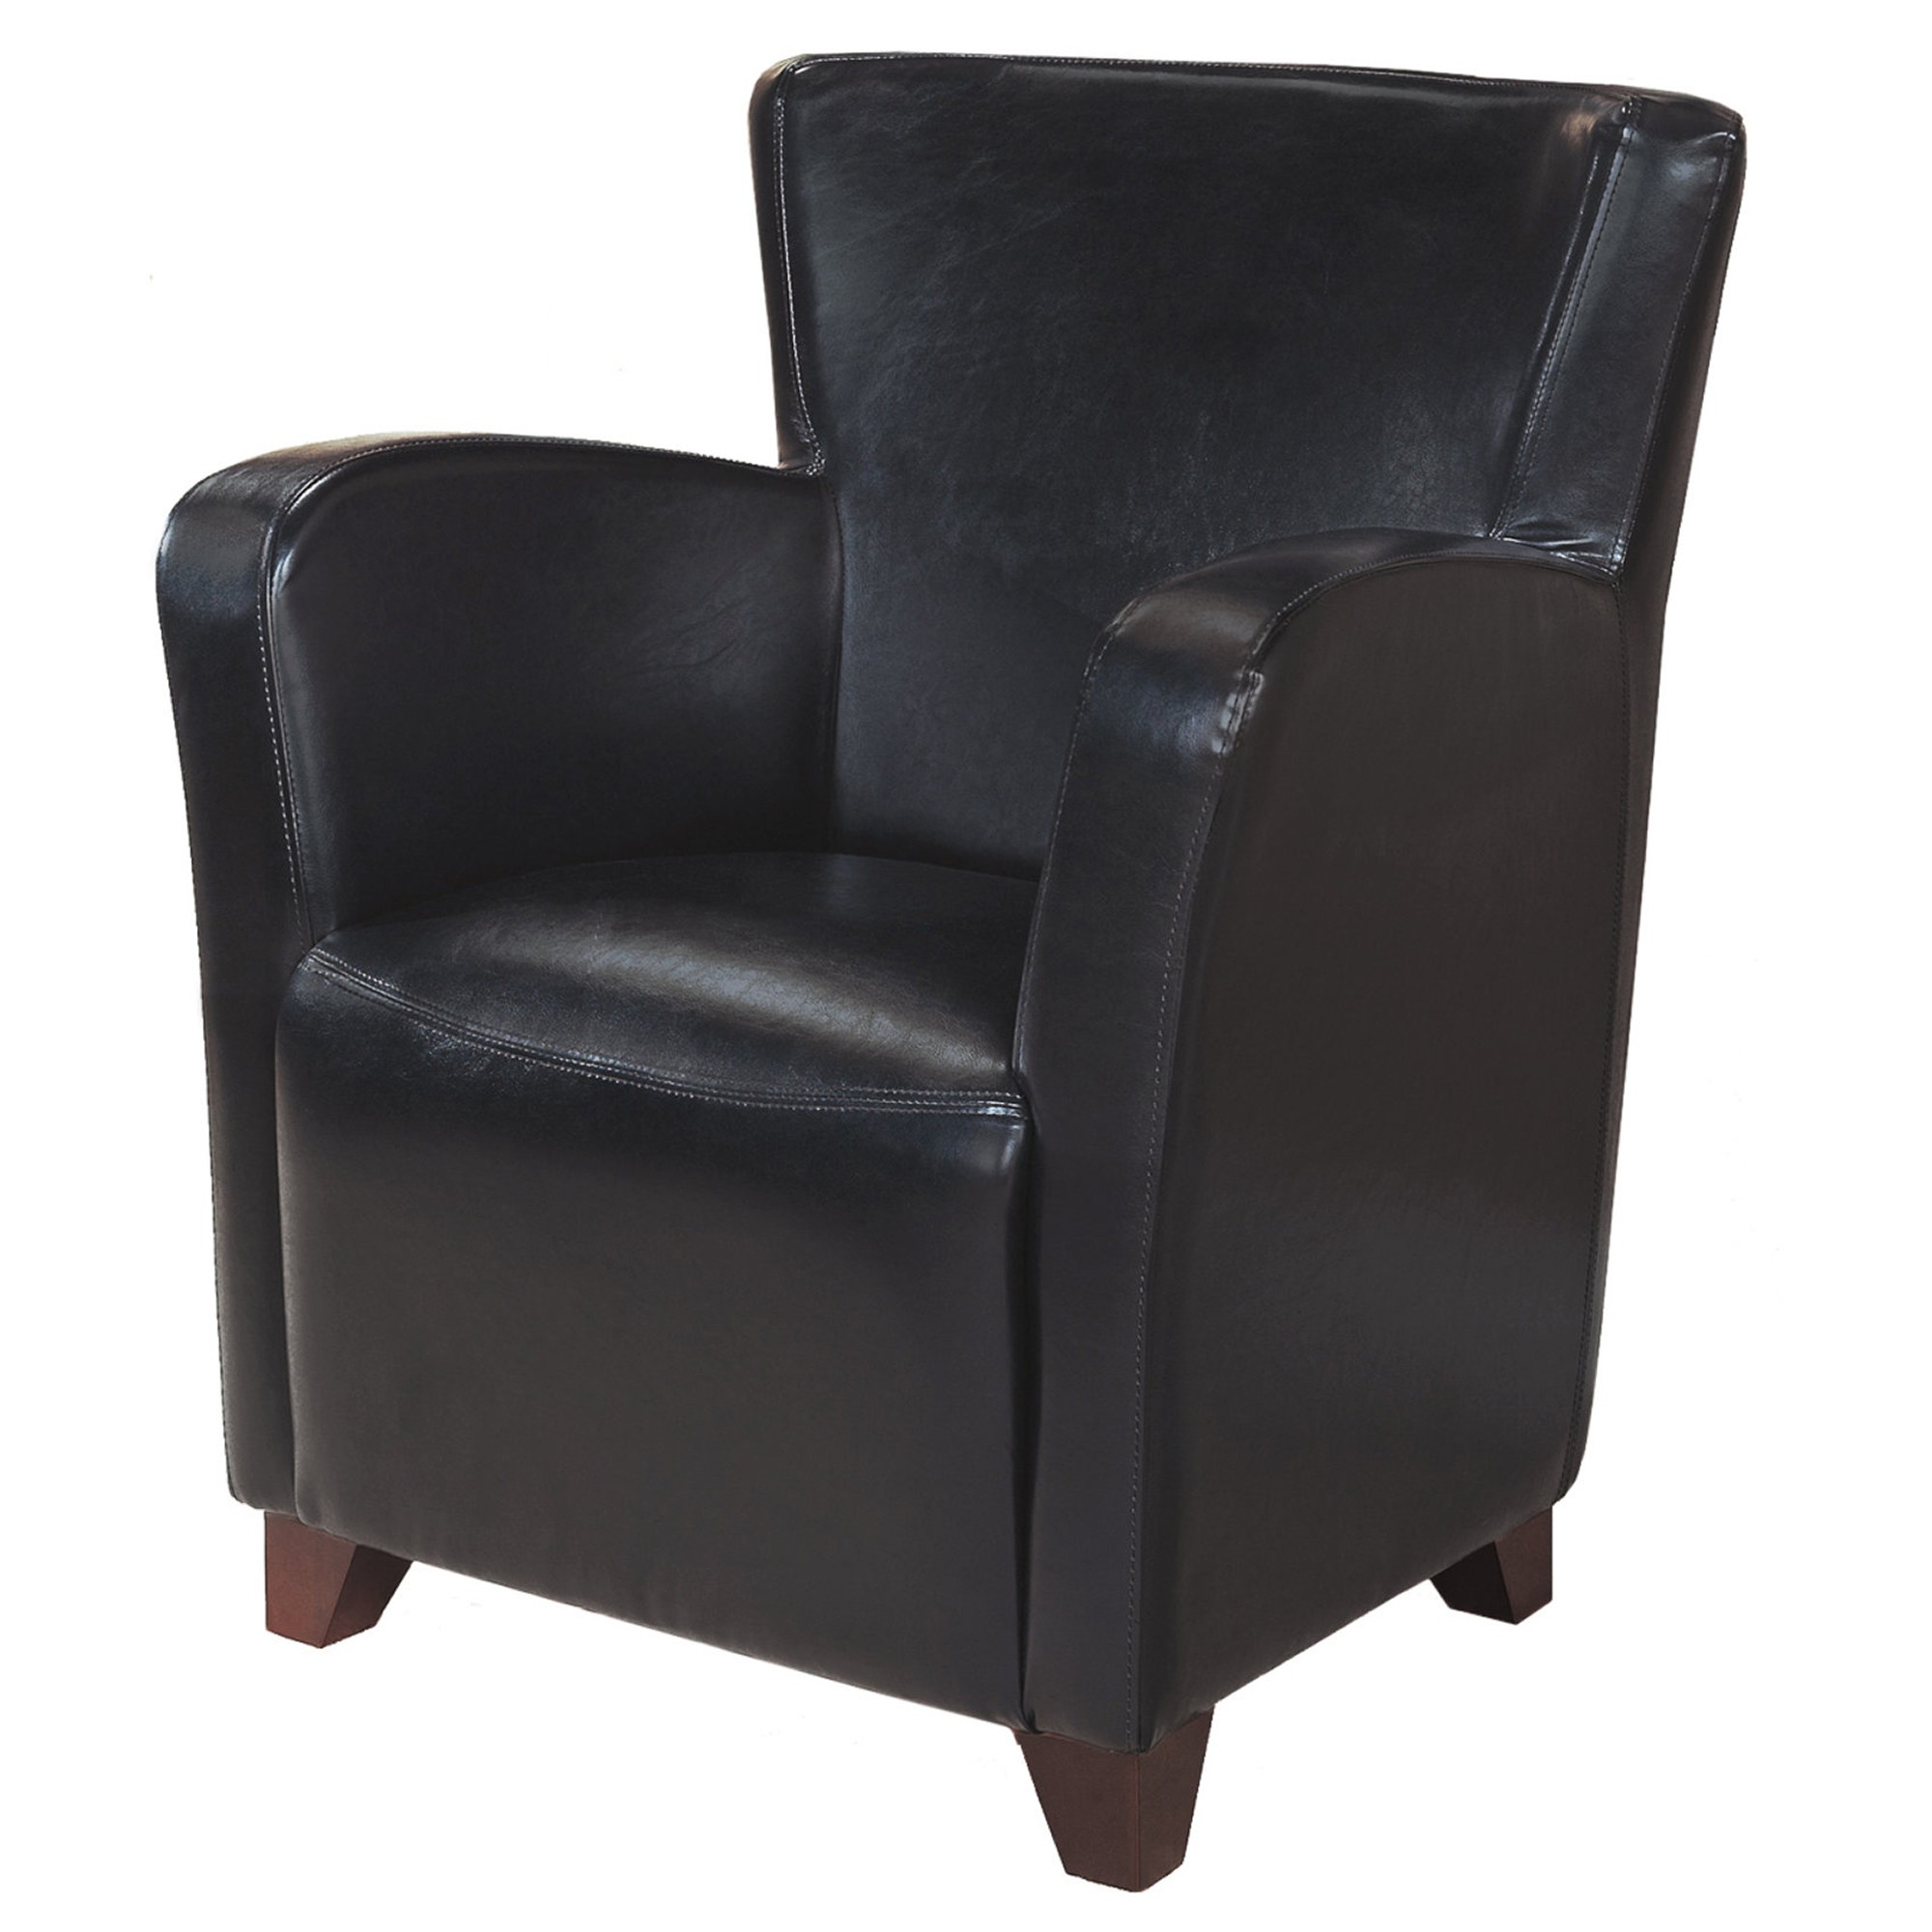 30" x 30" x 35" Black Leather-Look Foam and Solid Wood Accent Chair